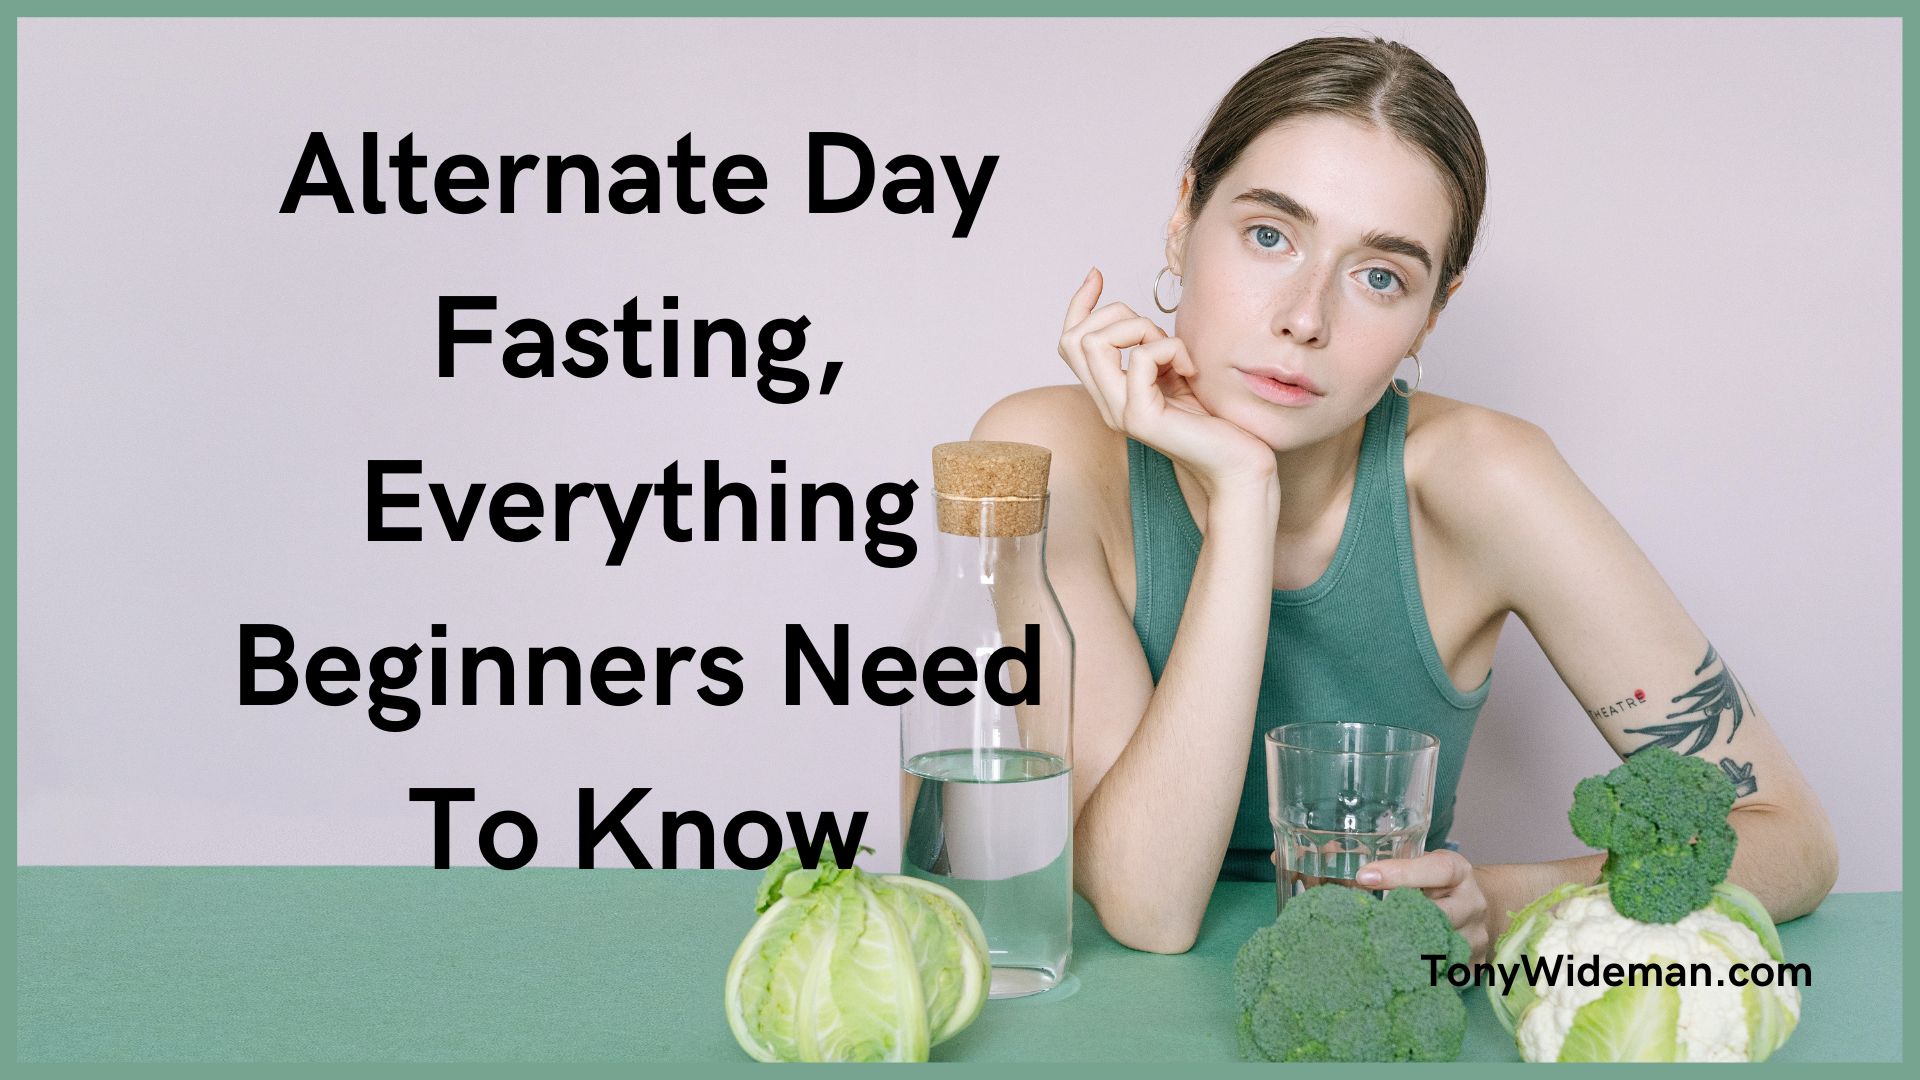 Alternate Day Fasting, Everything Beginners Need To Know